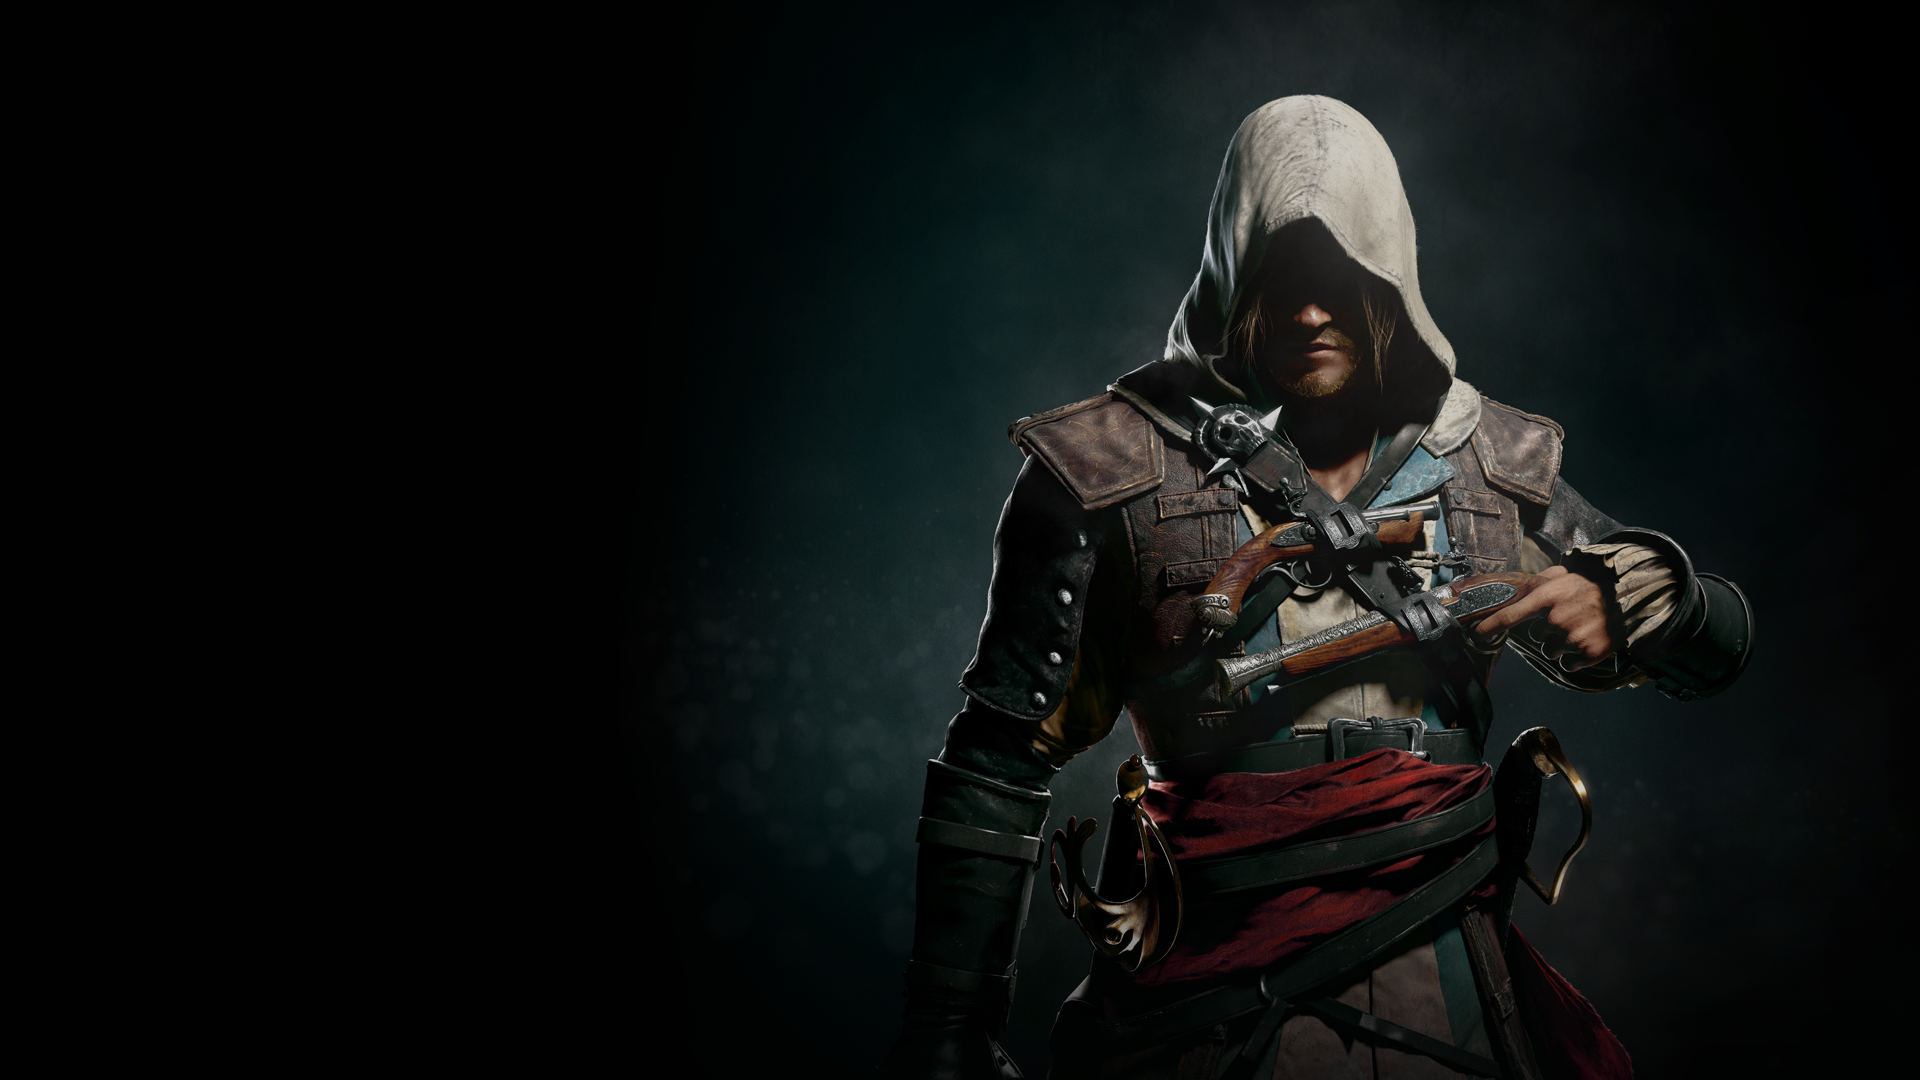 General 1920x1080 Assassin's Creed video games Assassin's Creed: Black Flag Edward Kenway